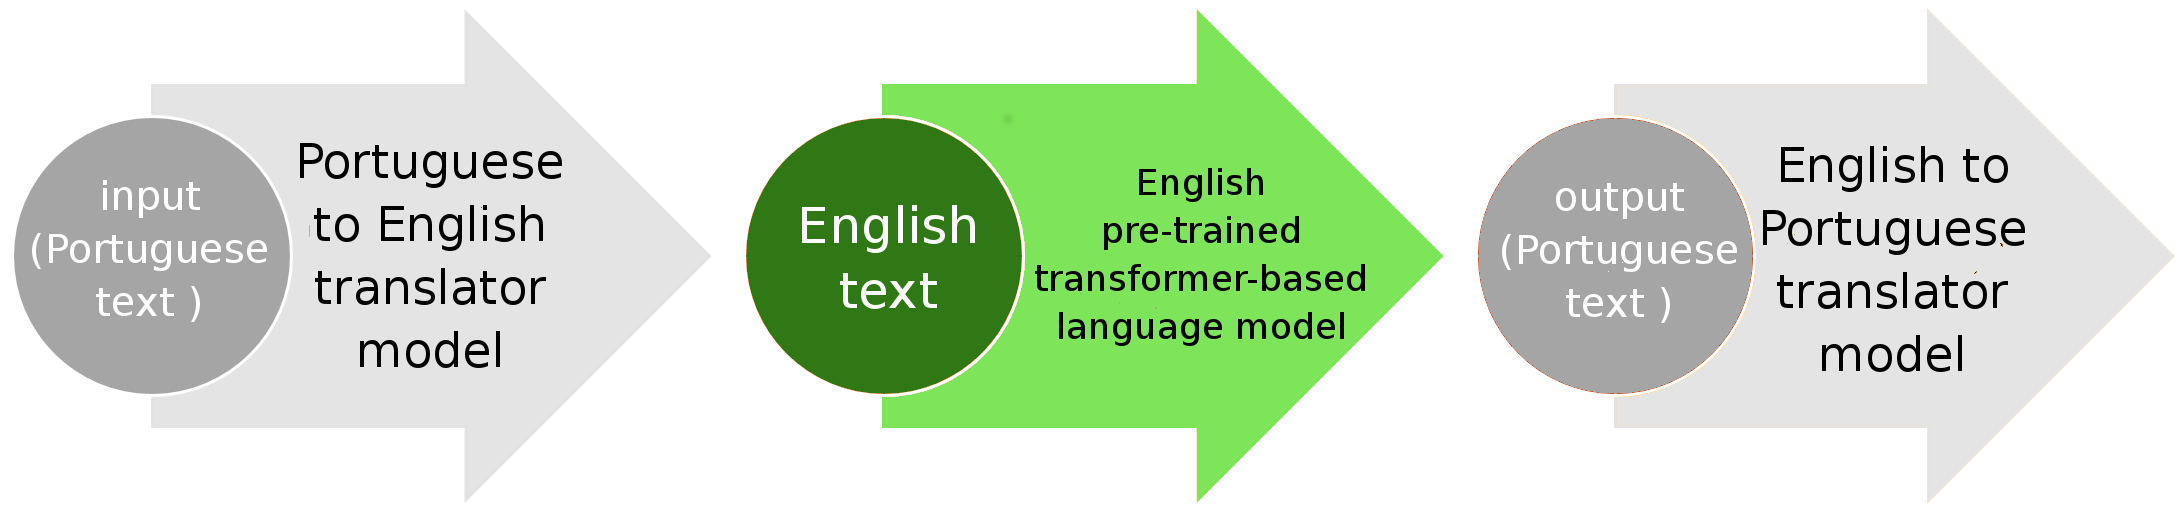 pipeline of existing pre-trained transformer-based models with a translator one at the input and output (image edited from fast.ai NLP)